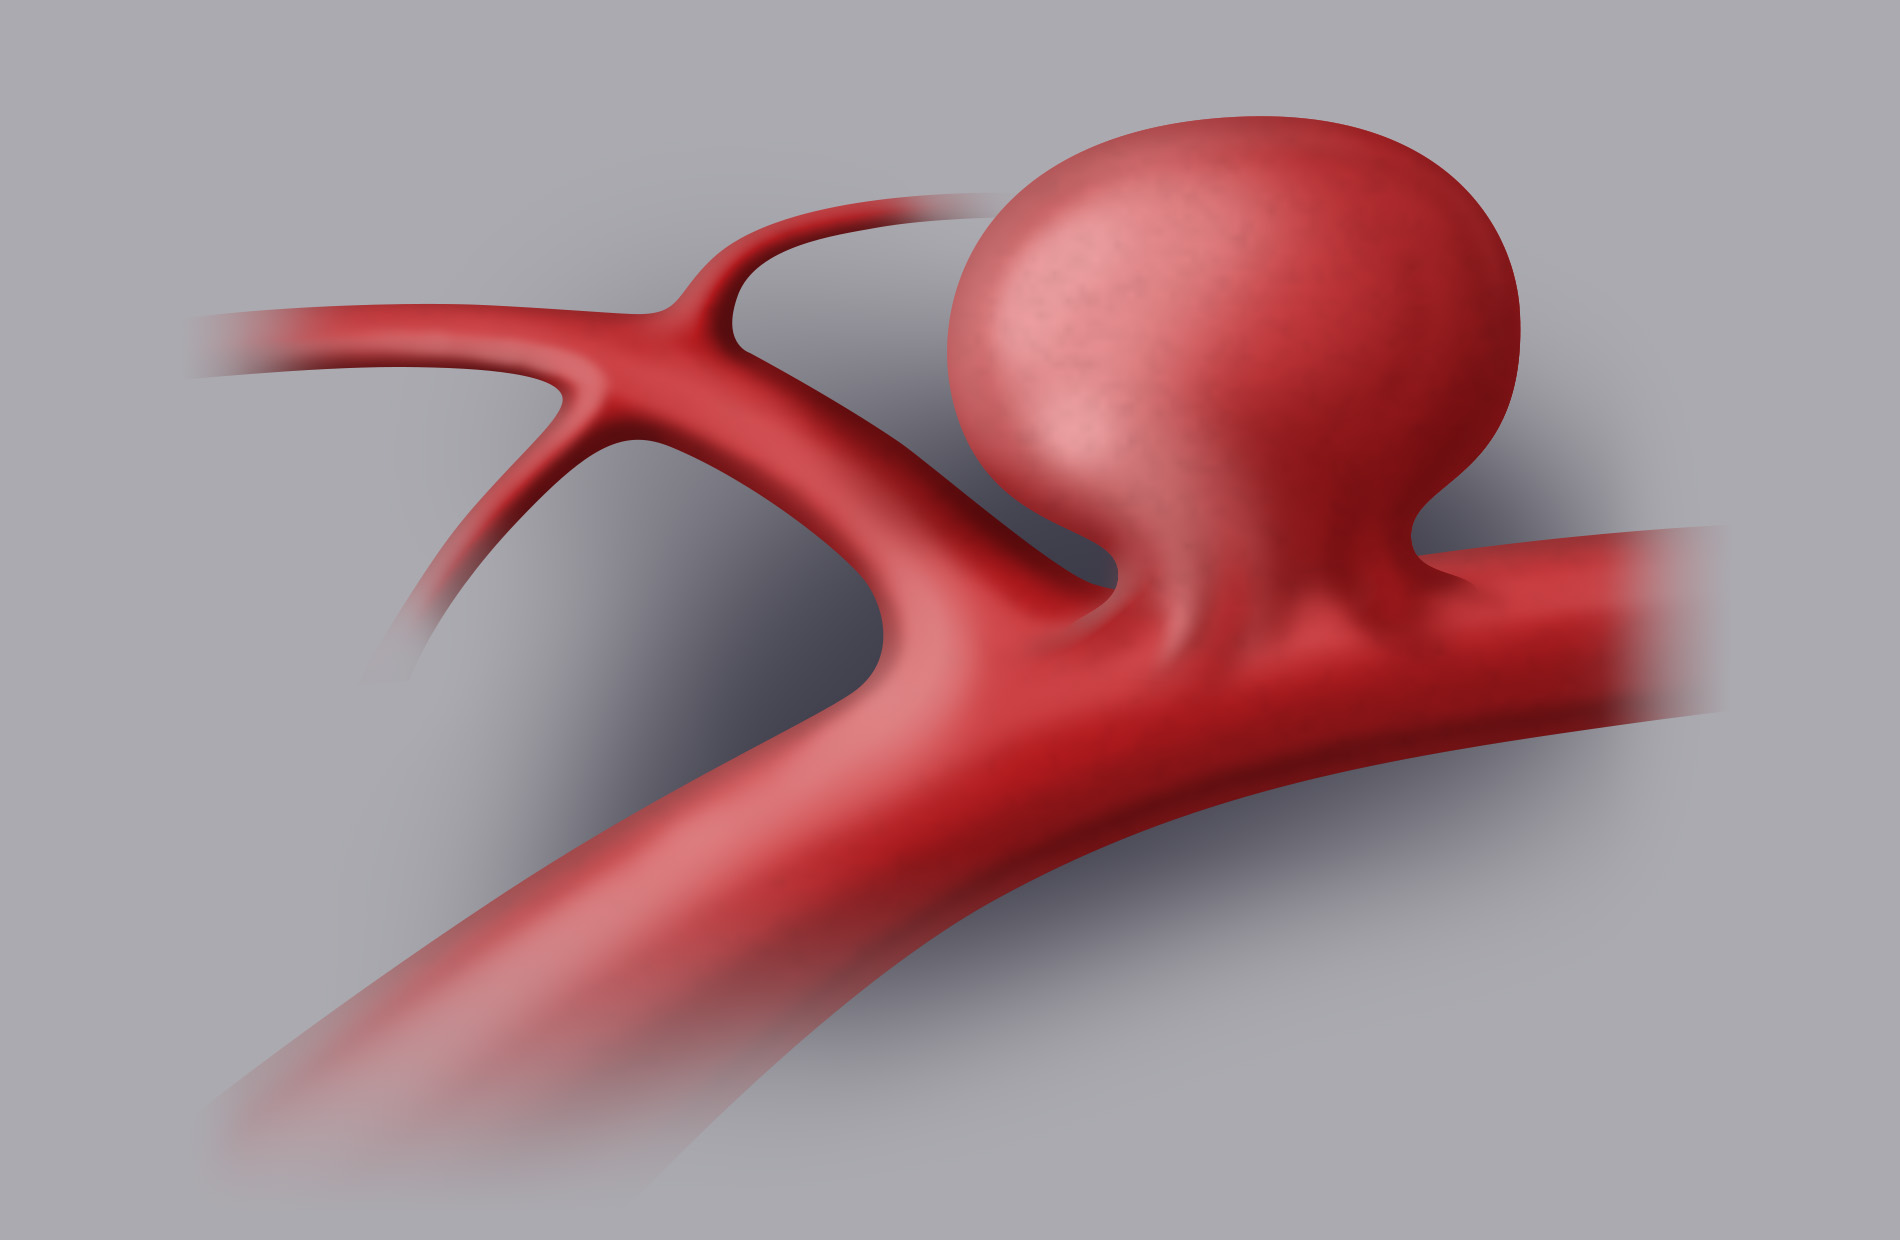 The aneurysm is a ballon-shaped arterial bulging; it is usually located where arteries bifurcate